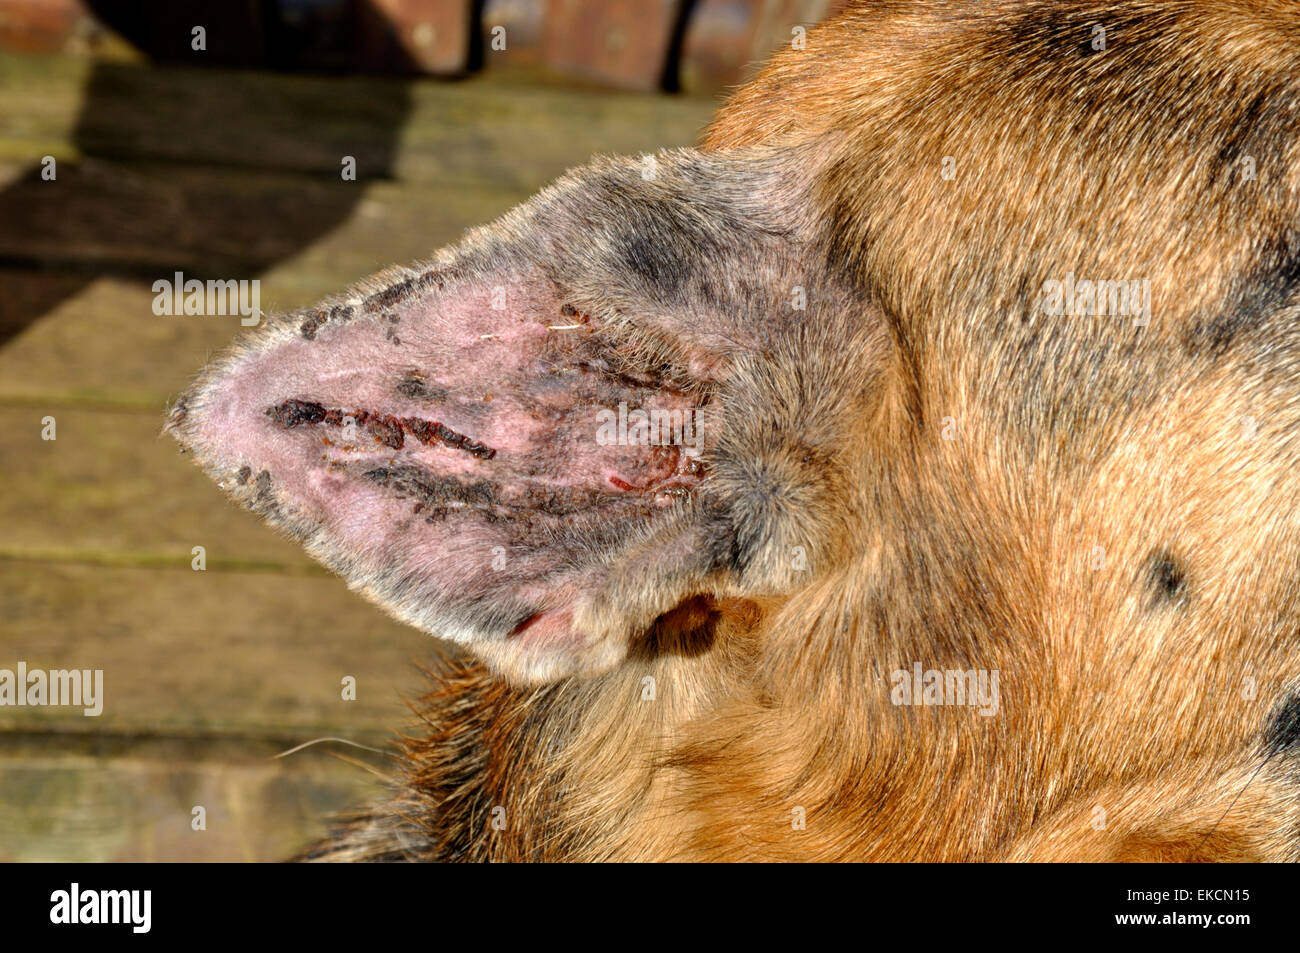 can a hematoma burst on a dogs ear